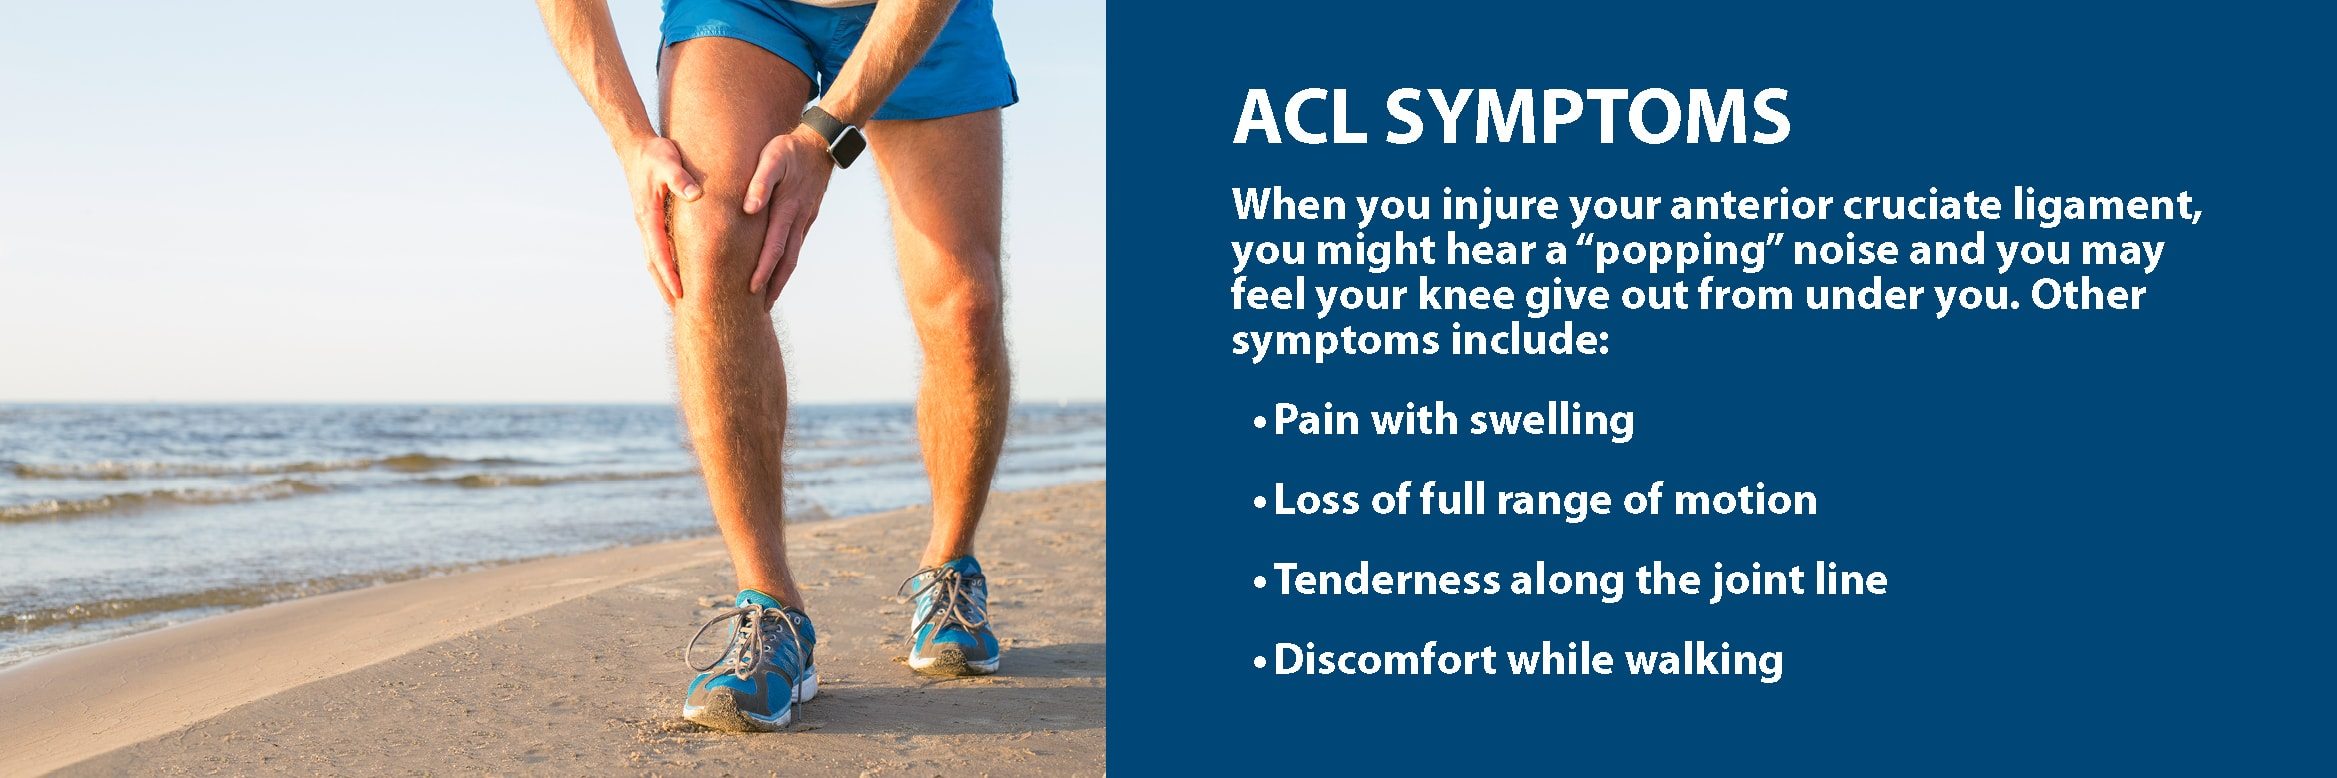 ACL Injury: Does It Require Surgery? - OrthoInfo - AAOS